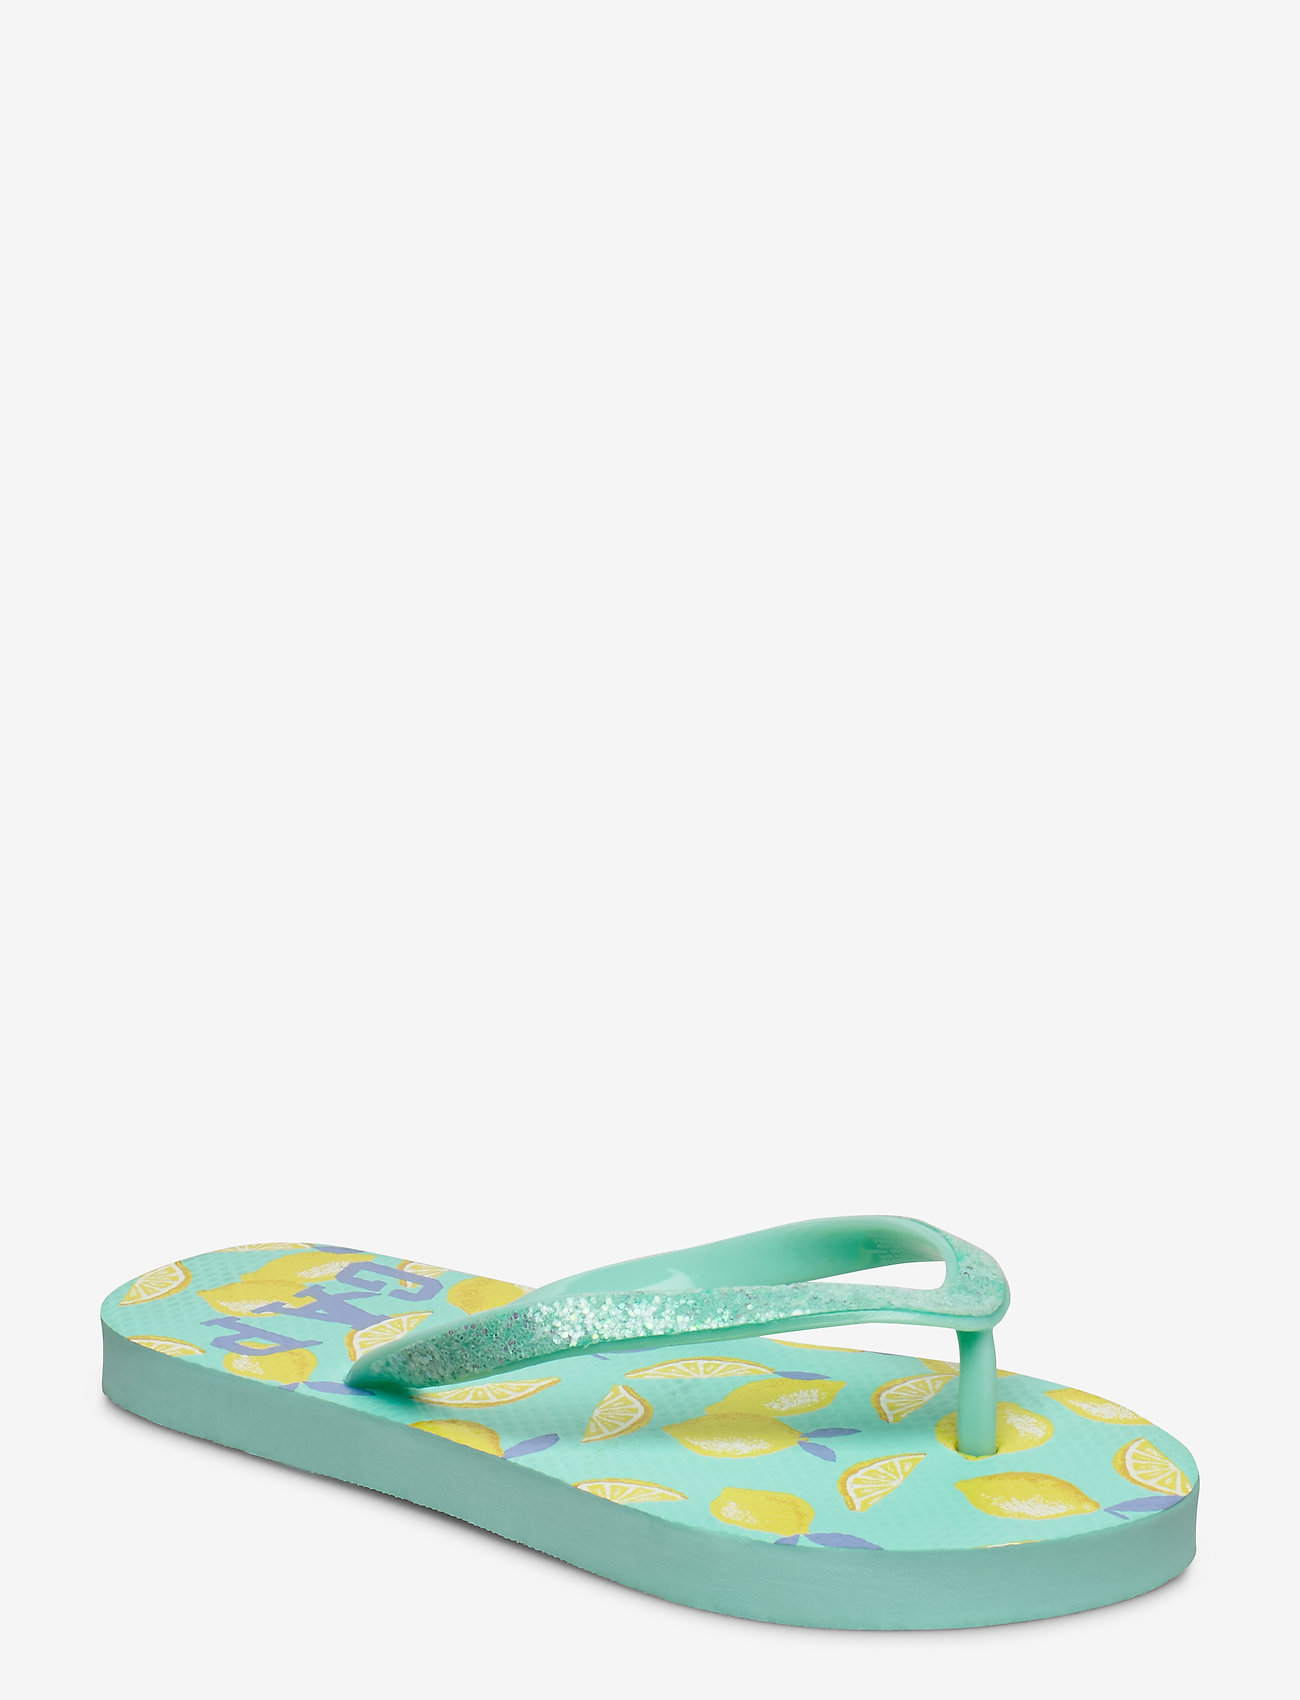 gap water shoes